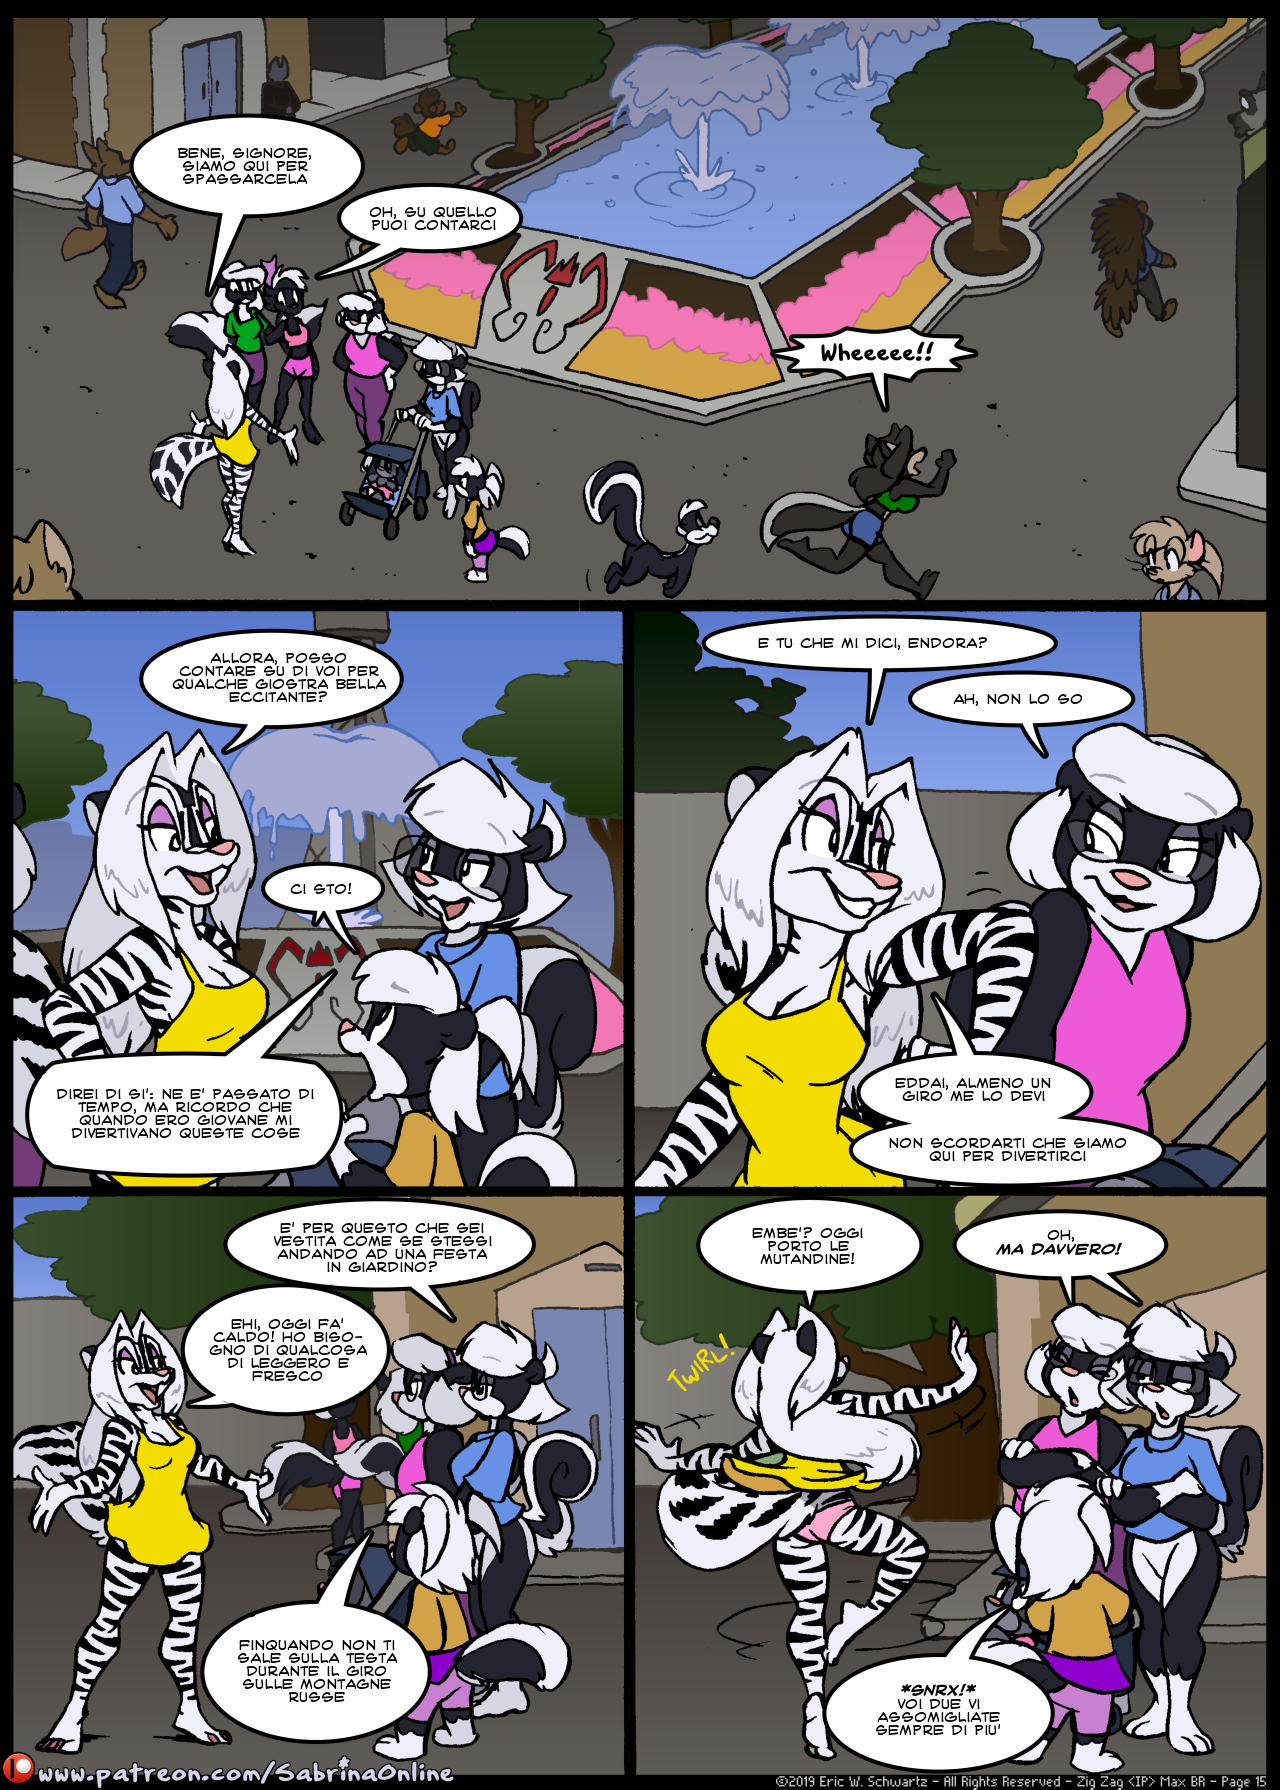 SOL_03_Skunks-day-out-15.png